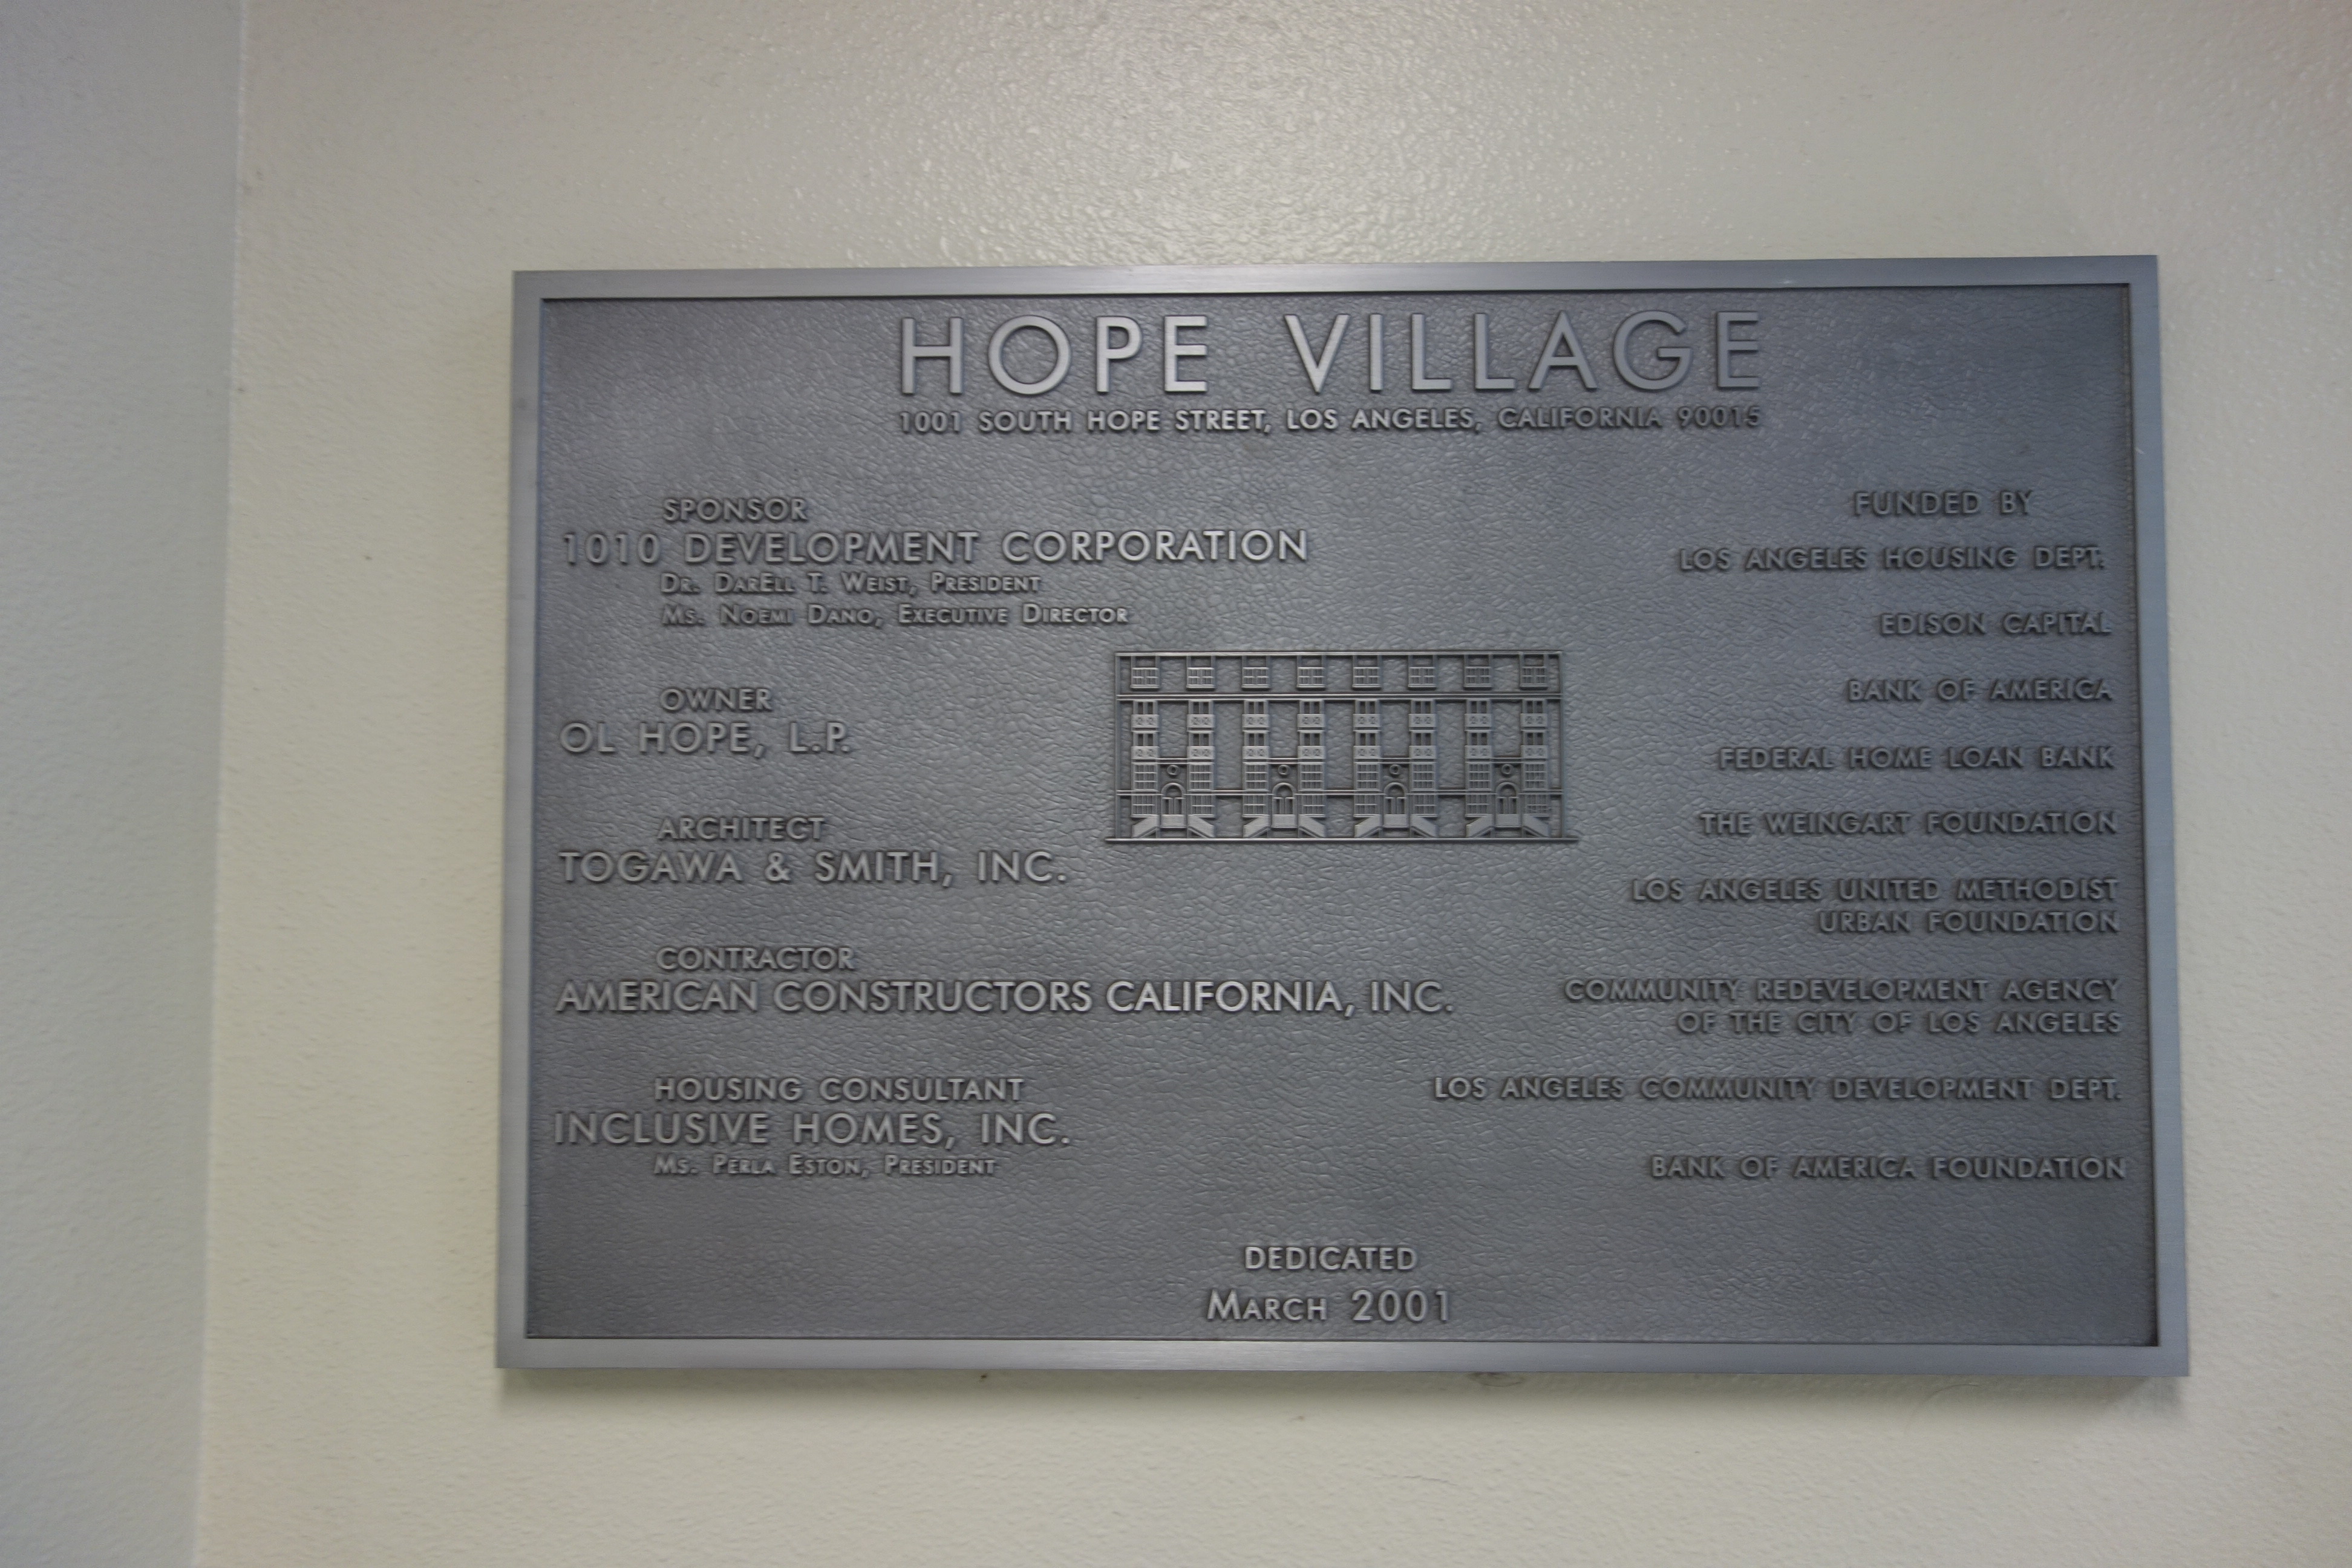 A close up image of a plaque with the information for Hope Village